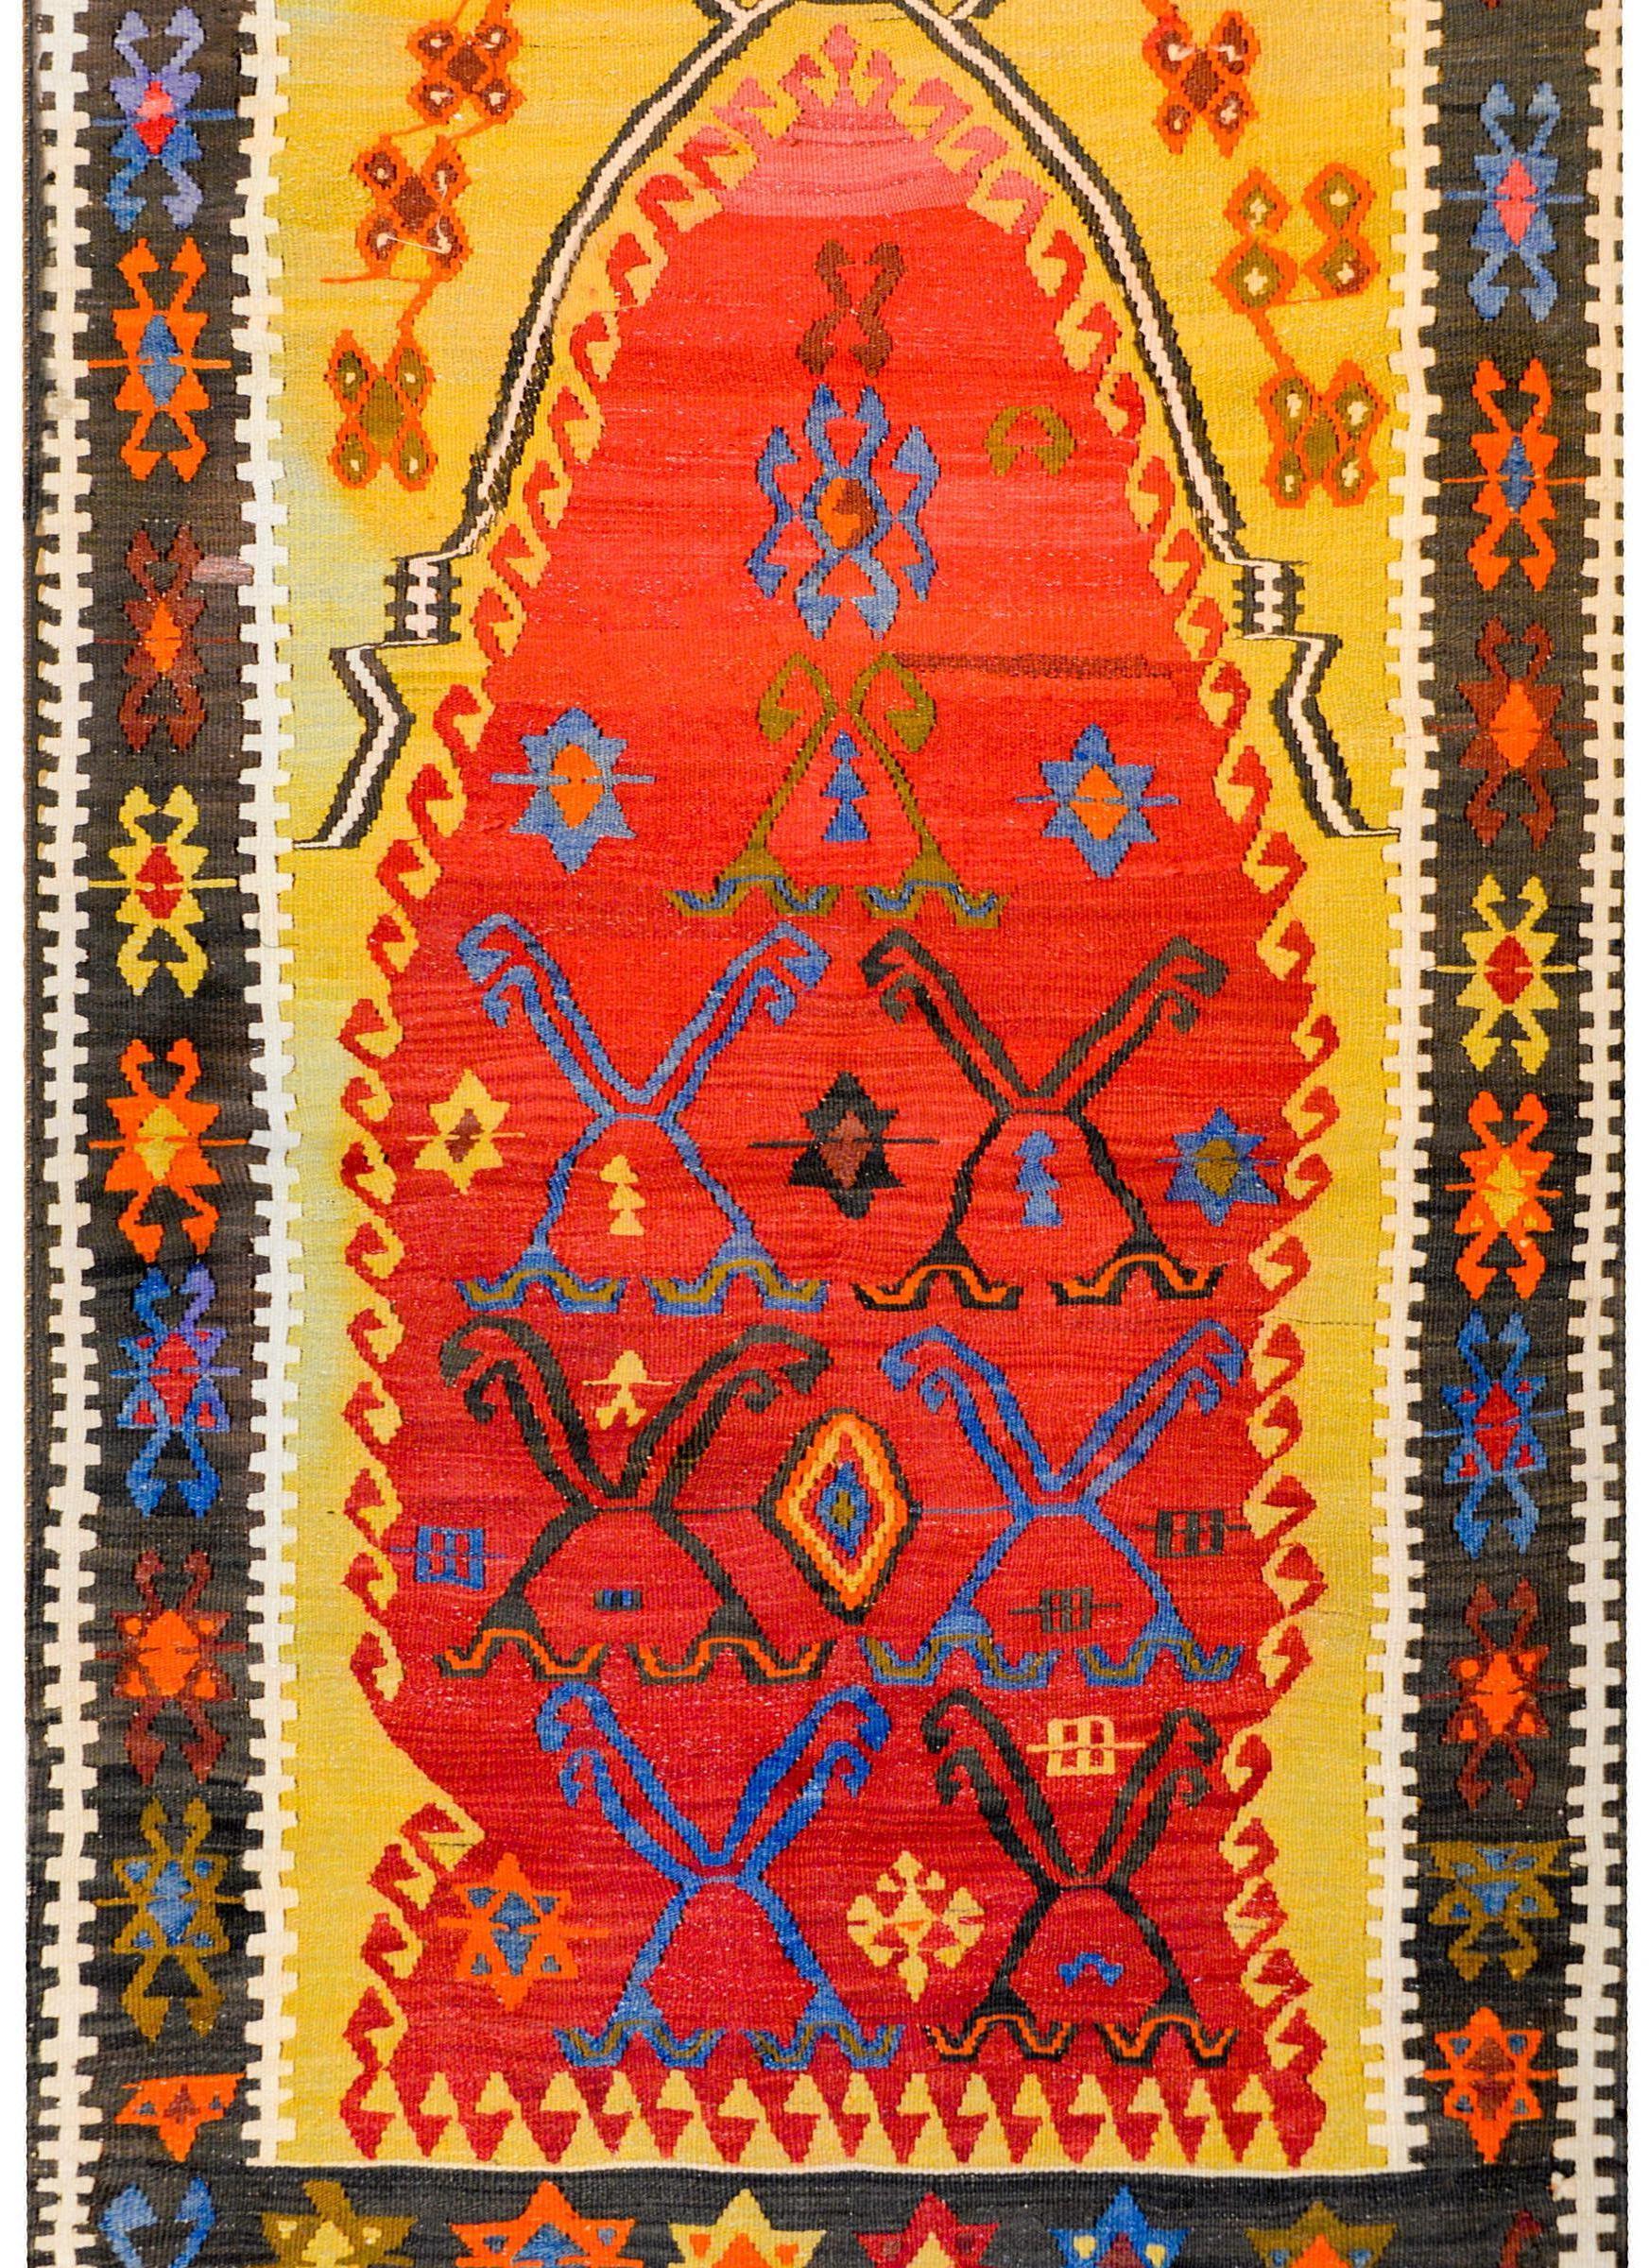 A fantastic early 20th century Turkish Kilim prayer rug with an incredible and boldly colored pattern of styled flowers and vines woven in indigo, green, and orange, on a rich crimson background surrounded by a bright gold frame with more stylized